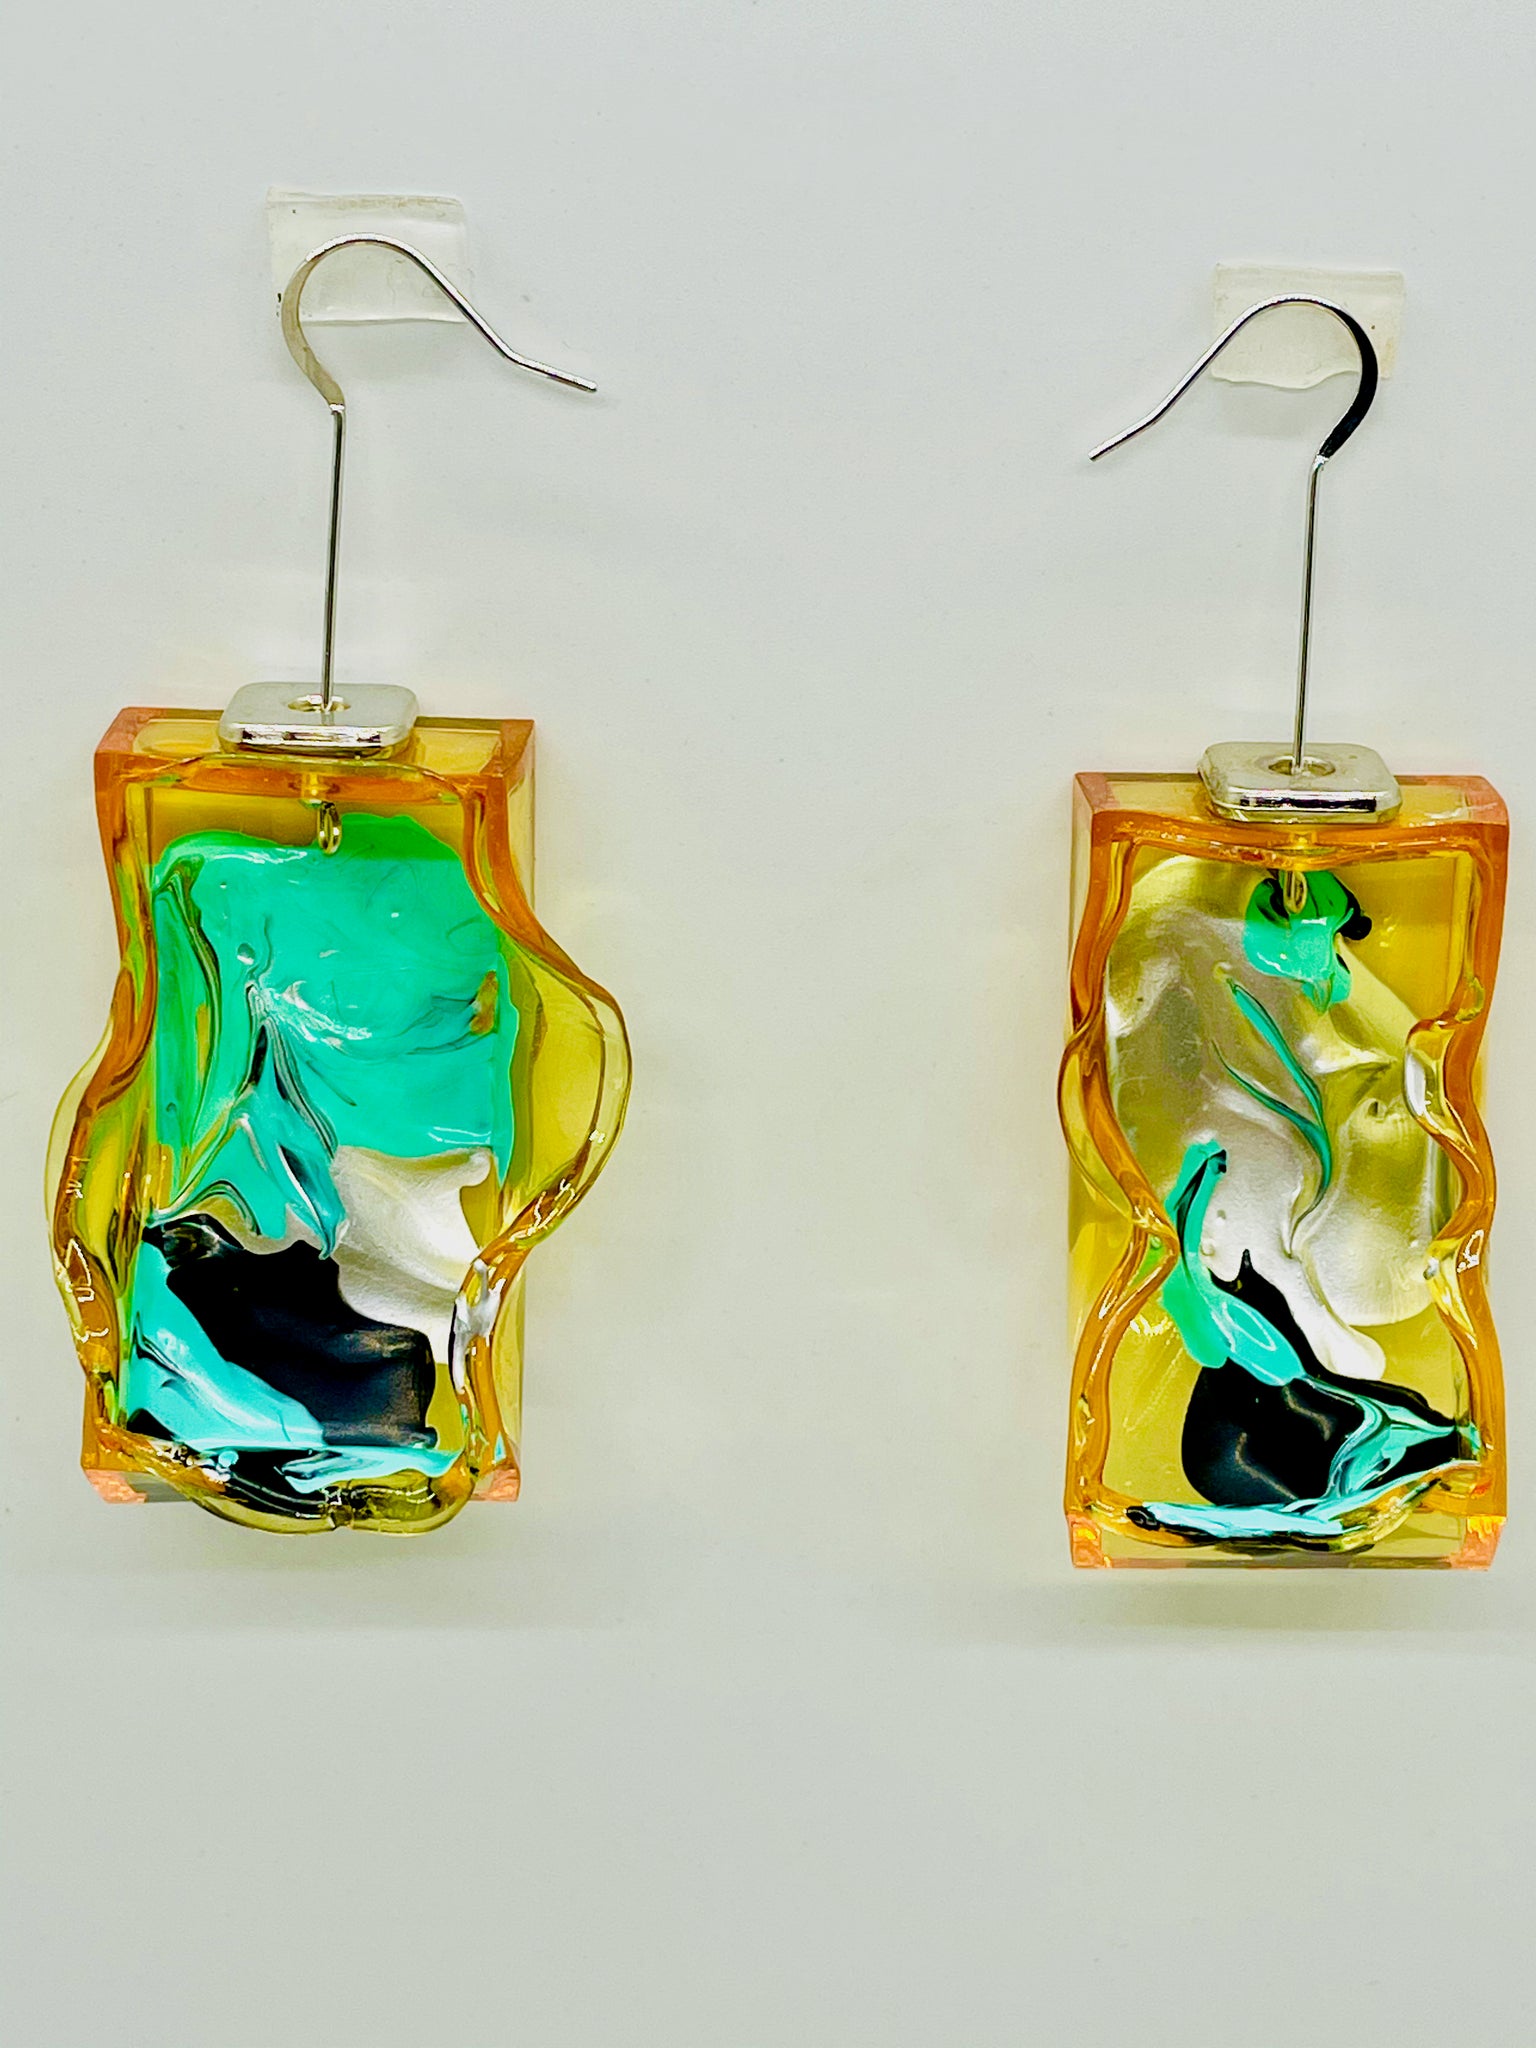 Fluorescent, lightweight, transparent, hand painted and molded, Node Art Earrings are one of a kind creations by the artist, Olga Alexander! Like all the Node Jewelry these can be customized as per your request at no extra charge! They drop approximately 2.5 inches and offer vibrant colors and textures whichever way they turn!